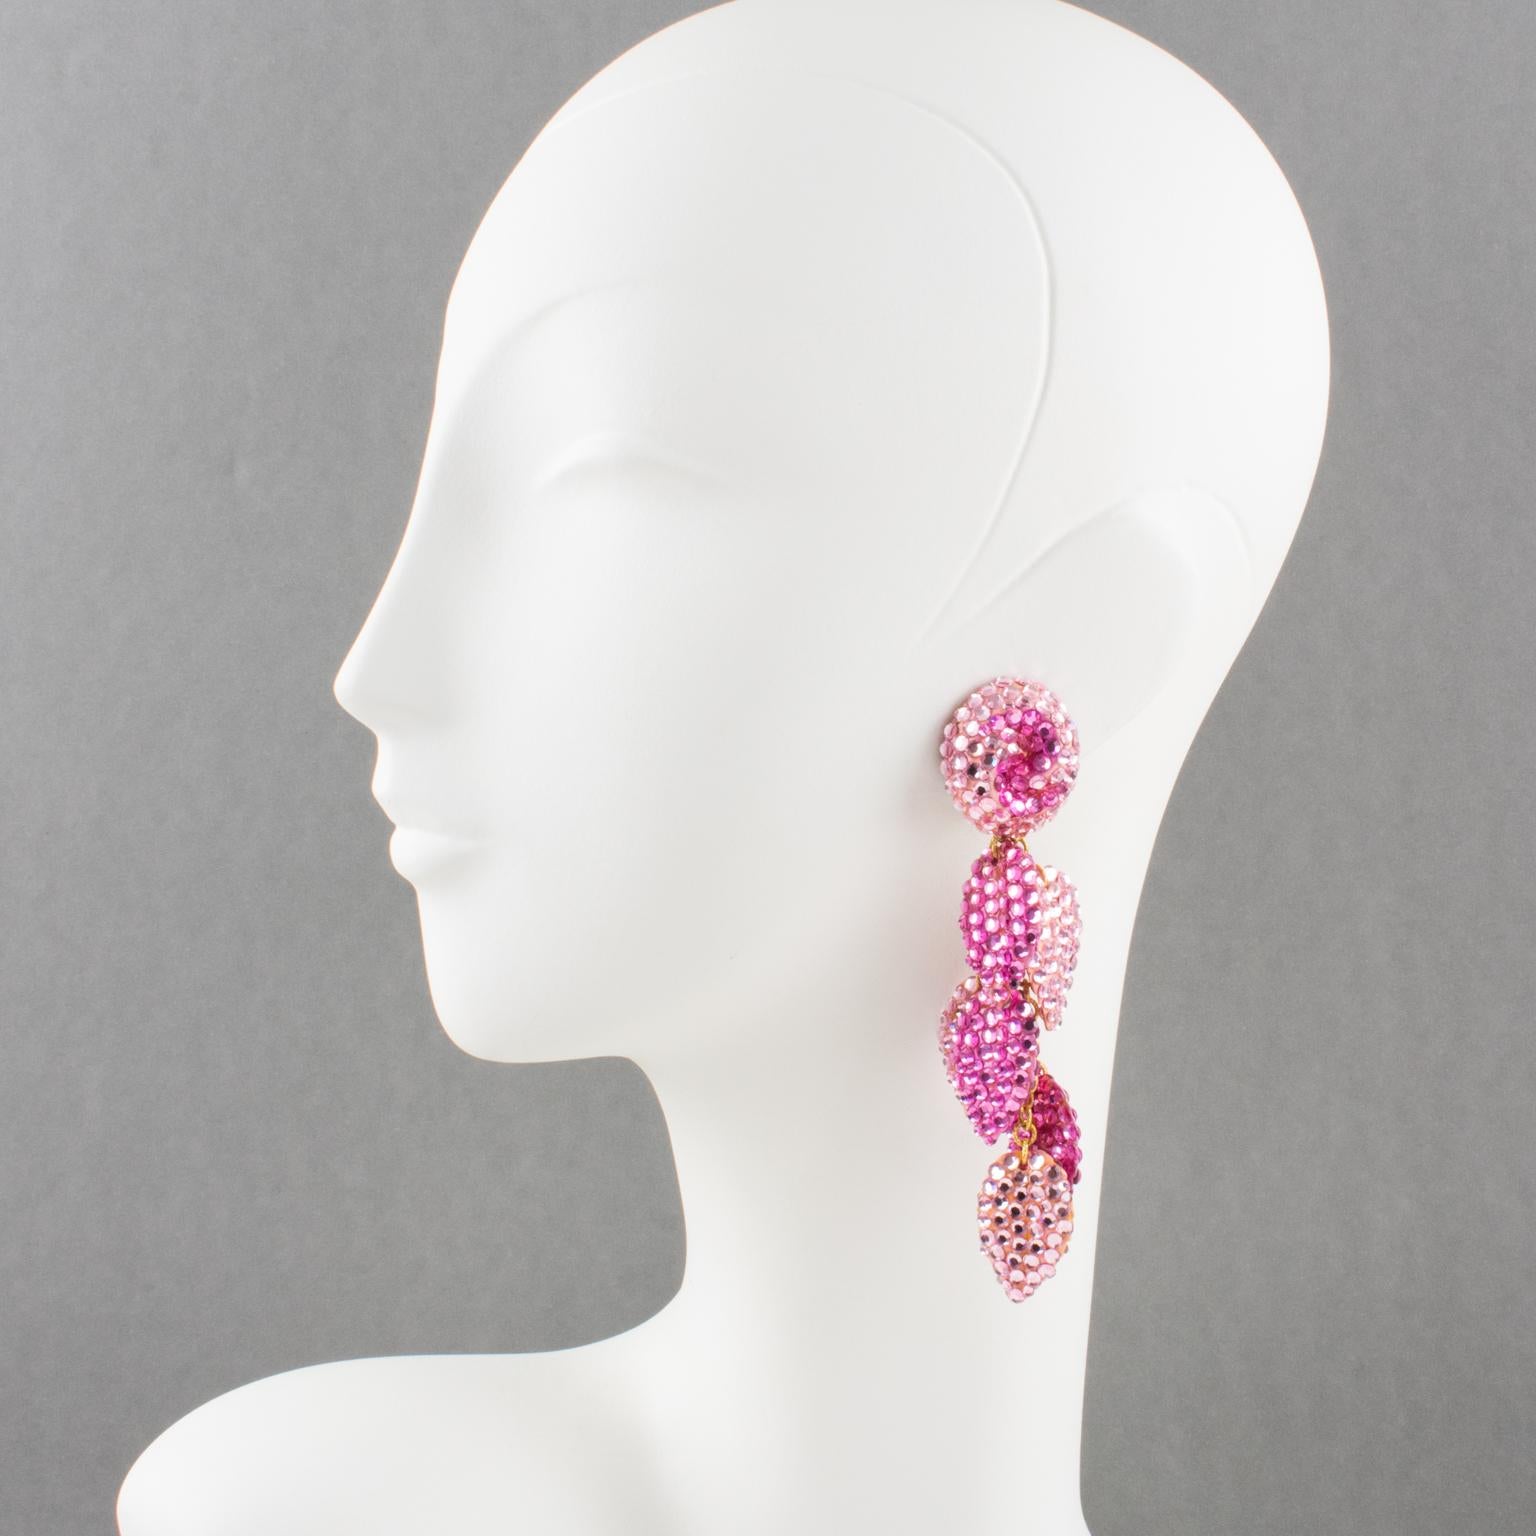 Stylish statement clip-on earrings designed by Richard Kerr in the 1980s. They are made up of his signature pave rhinestones. Featuring extra-long dangling shape with multi-chain and leaves shaped elements attached to them, all covered with colorful